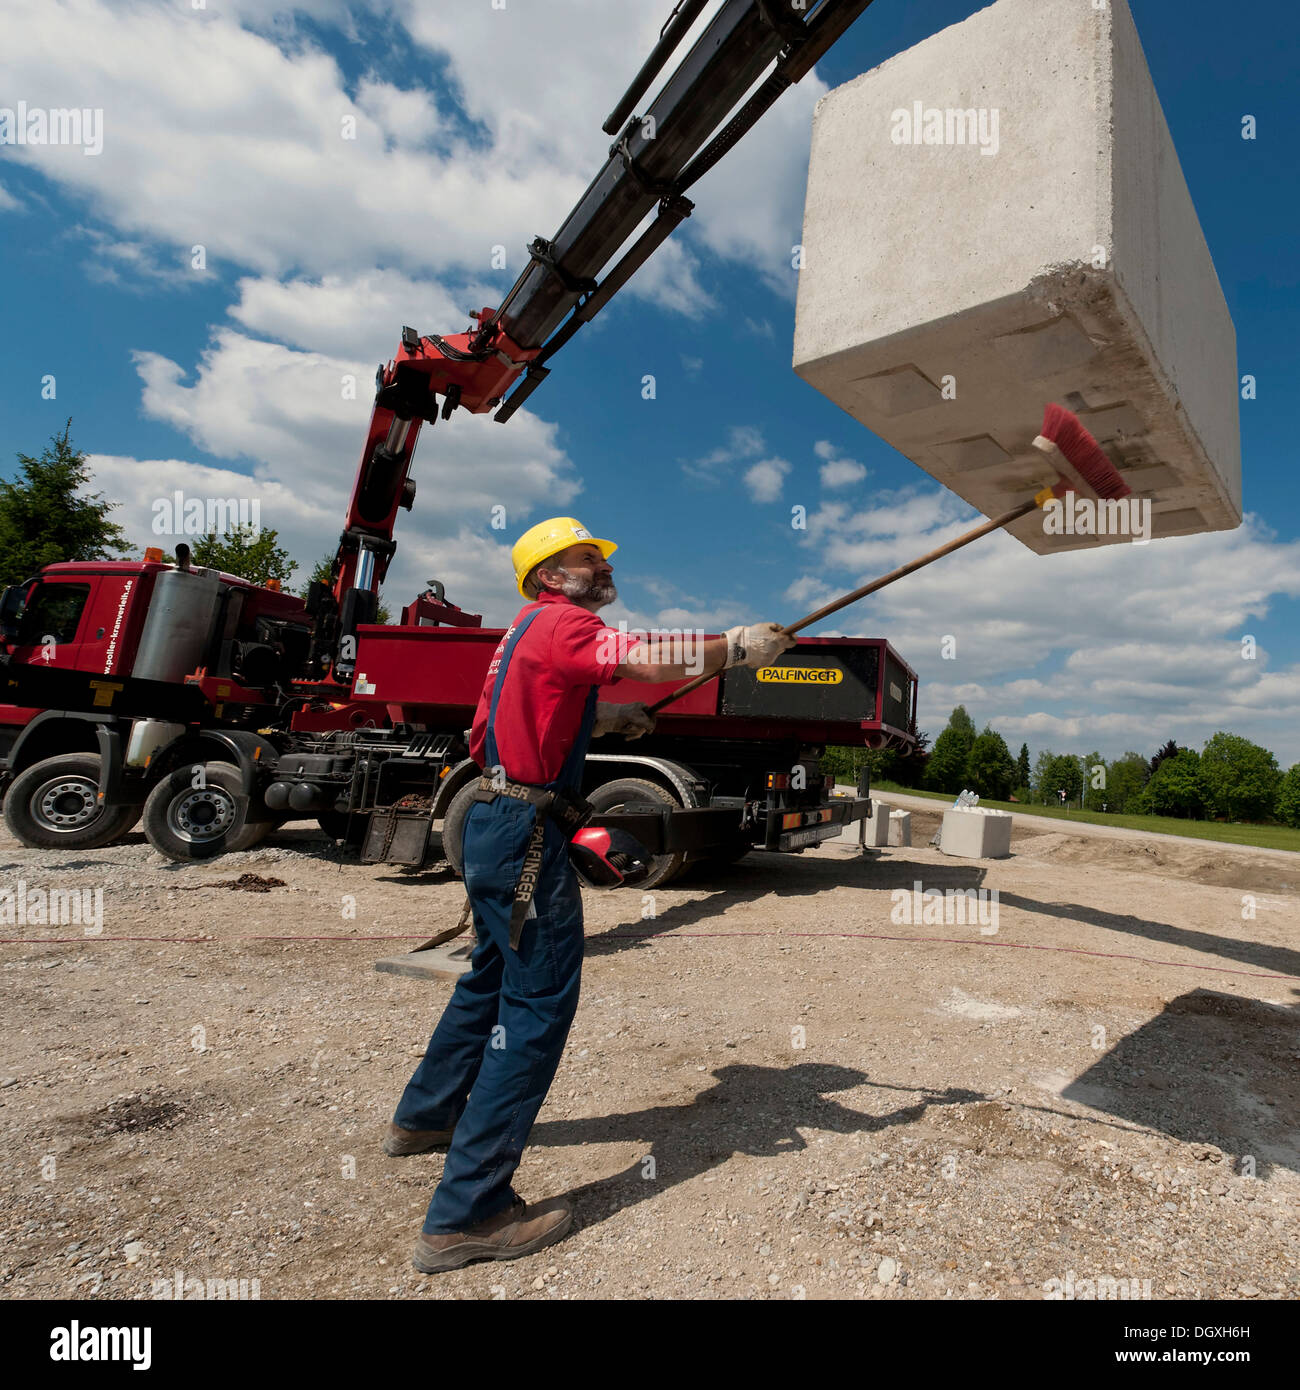 Crane operator cleaning the underside of a concrete block during a building site load test at a construction site in Fridolfing Stock Photo